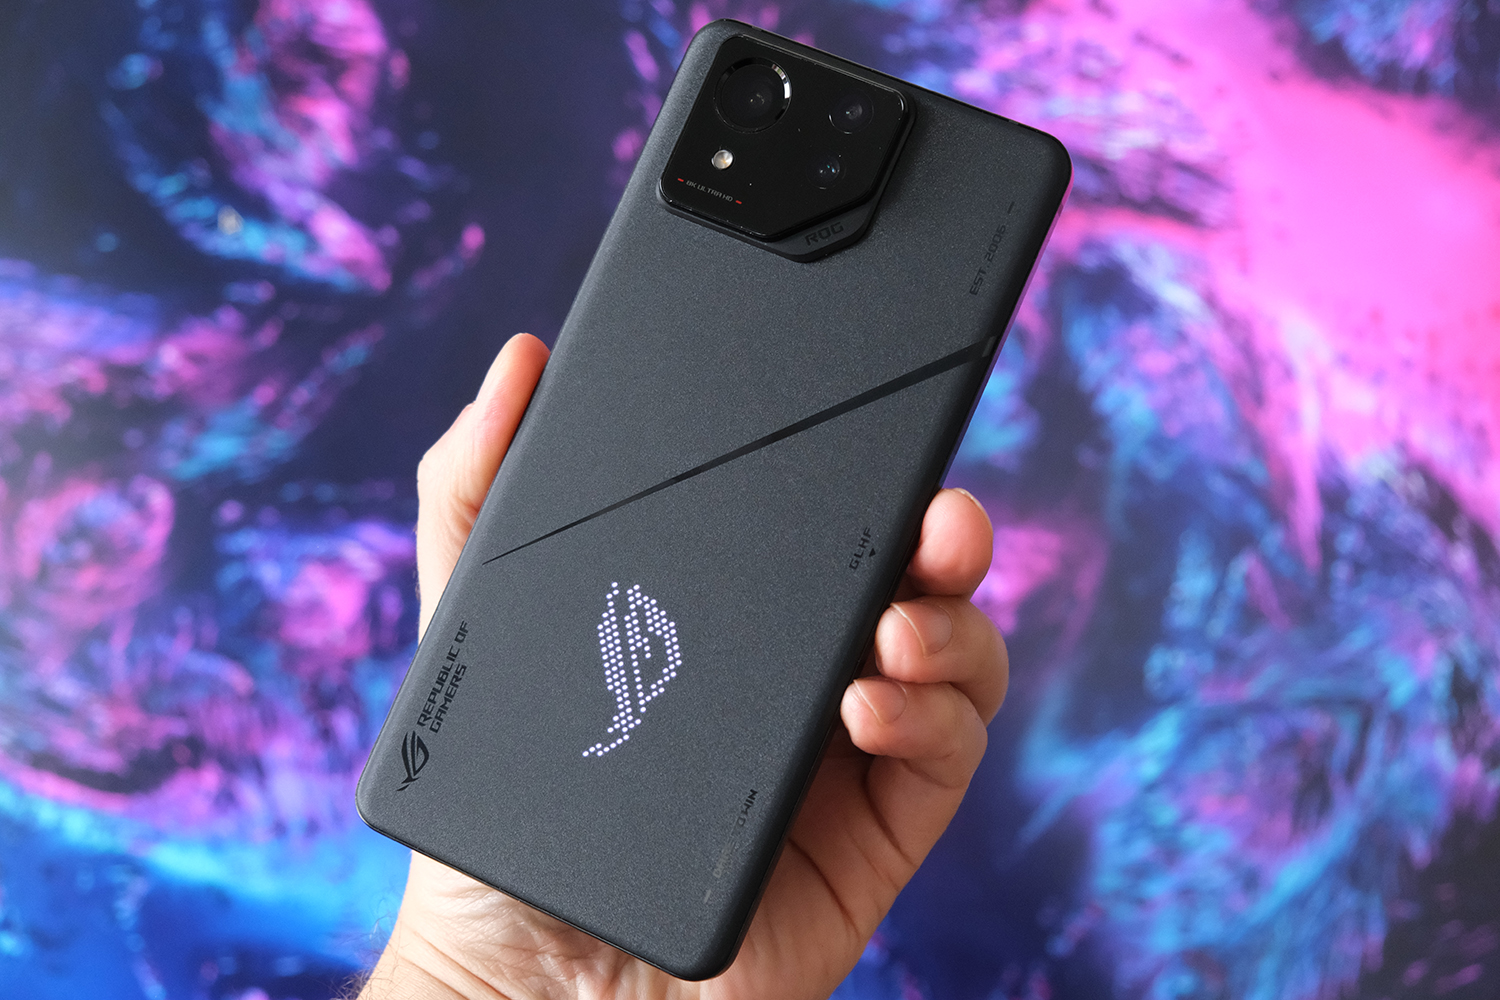 The Asus ROG Phone 8 Pro is the most grown-up gaming phone I've